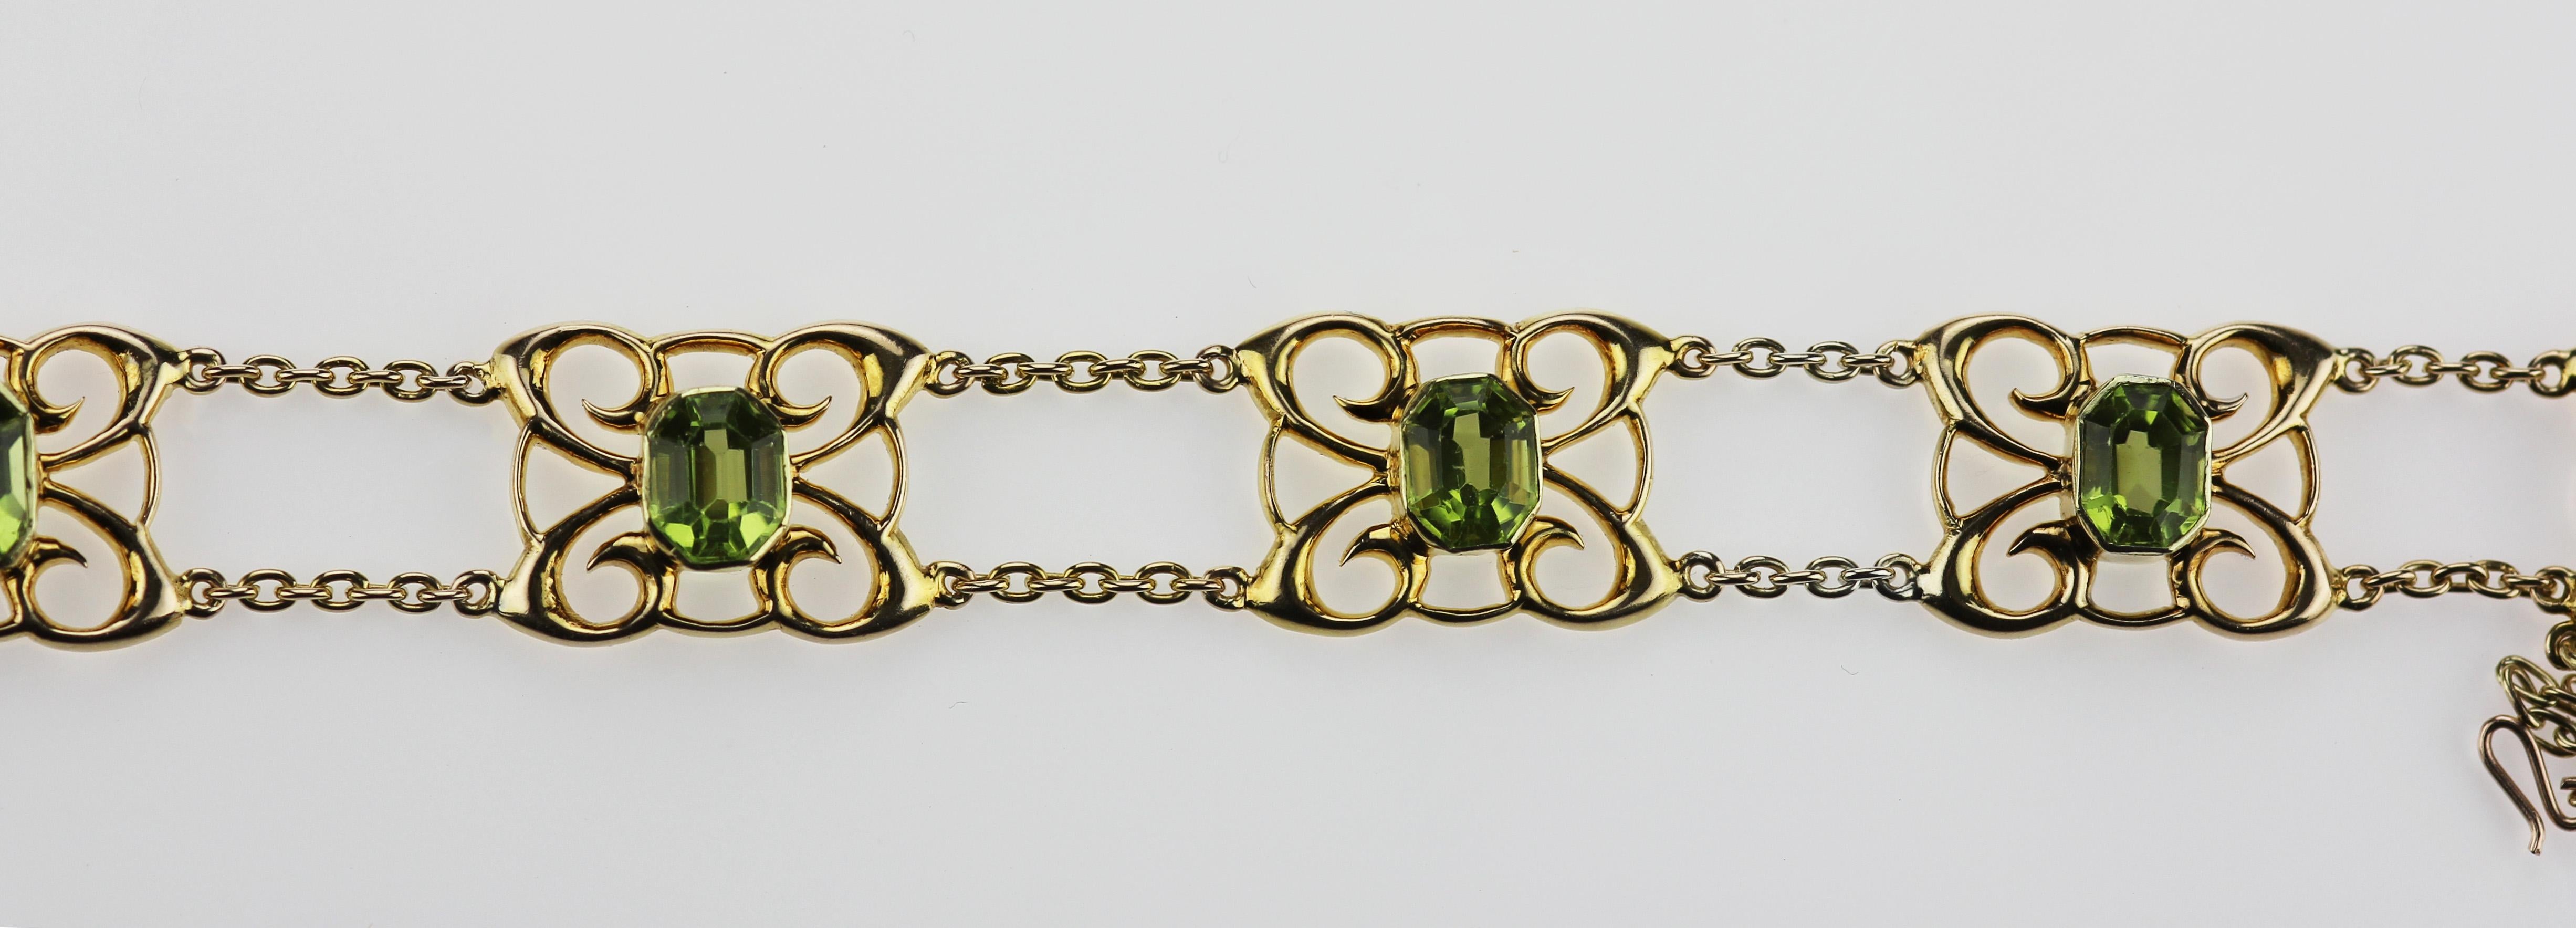 An antique Edwardian 15 ct yellow gold bracelet set with peridots and safety chain attached. Seven peridot in rectangular emerald cut, approximate total weight 7.0 cts. 
Bracelet Length: 19.0 cm
Bracelet Width: 12.5 mm
Gross weight: 16.0 grams